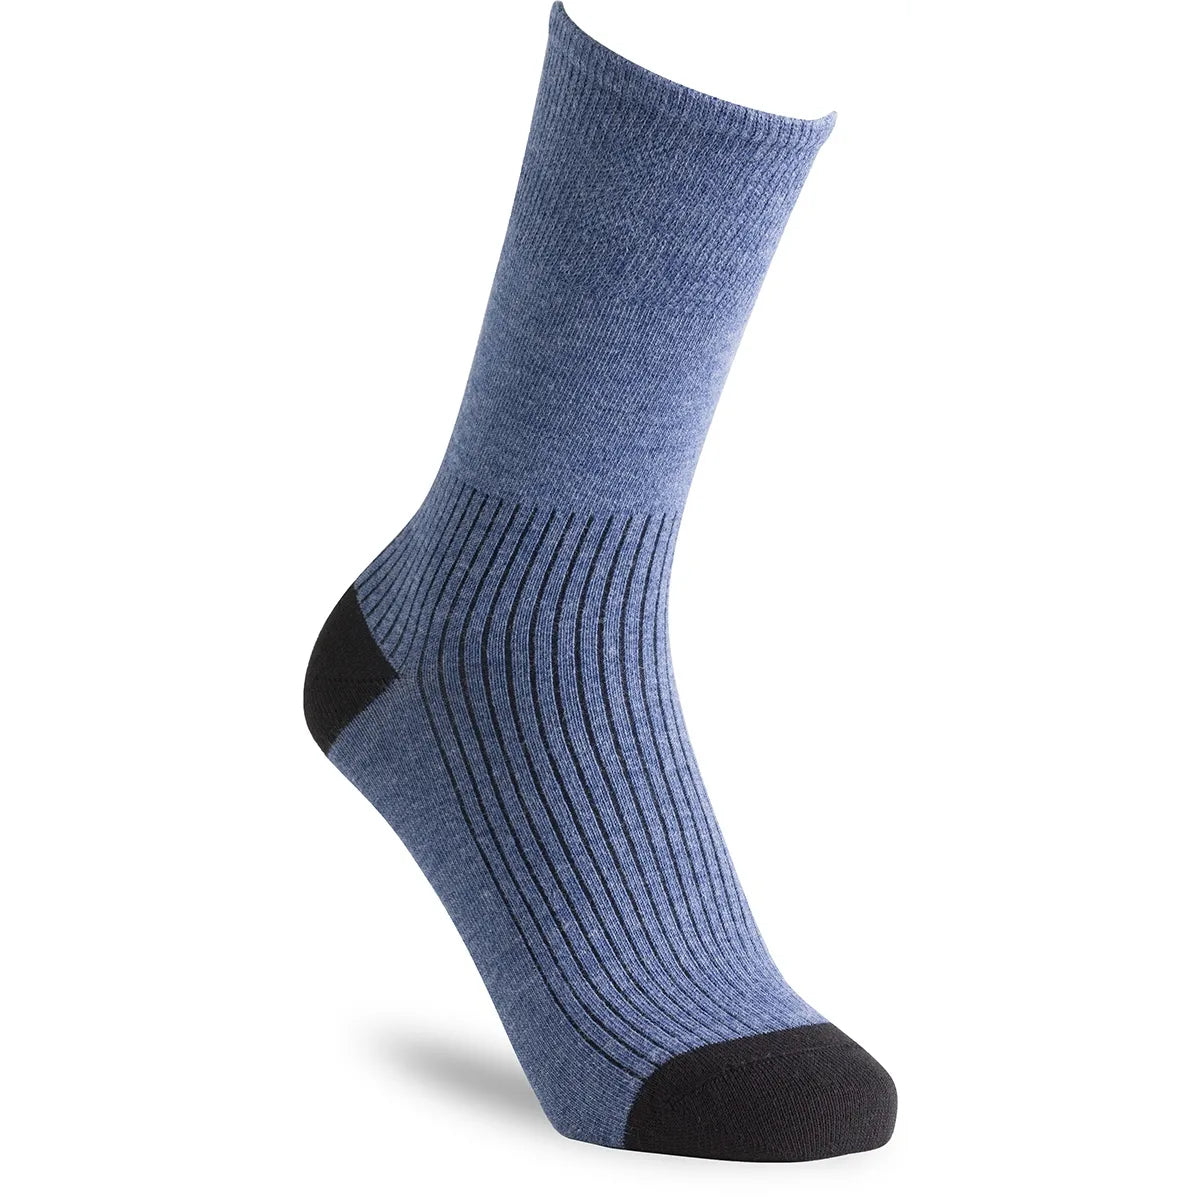 Gripped Socks. Luxurious with Standard to Roomy Fit ( 1 pair pack)